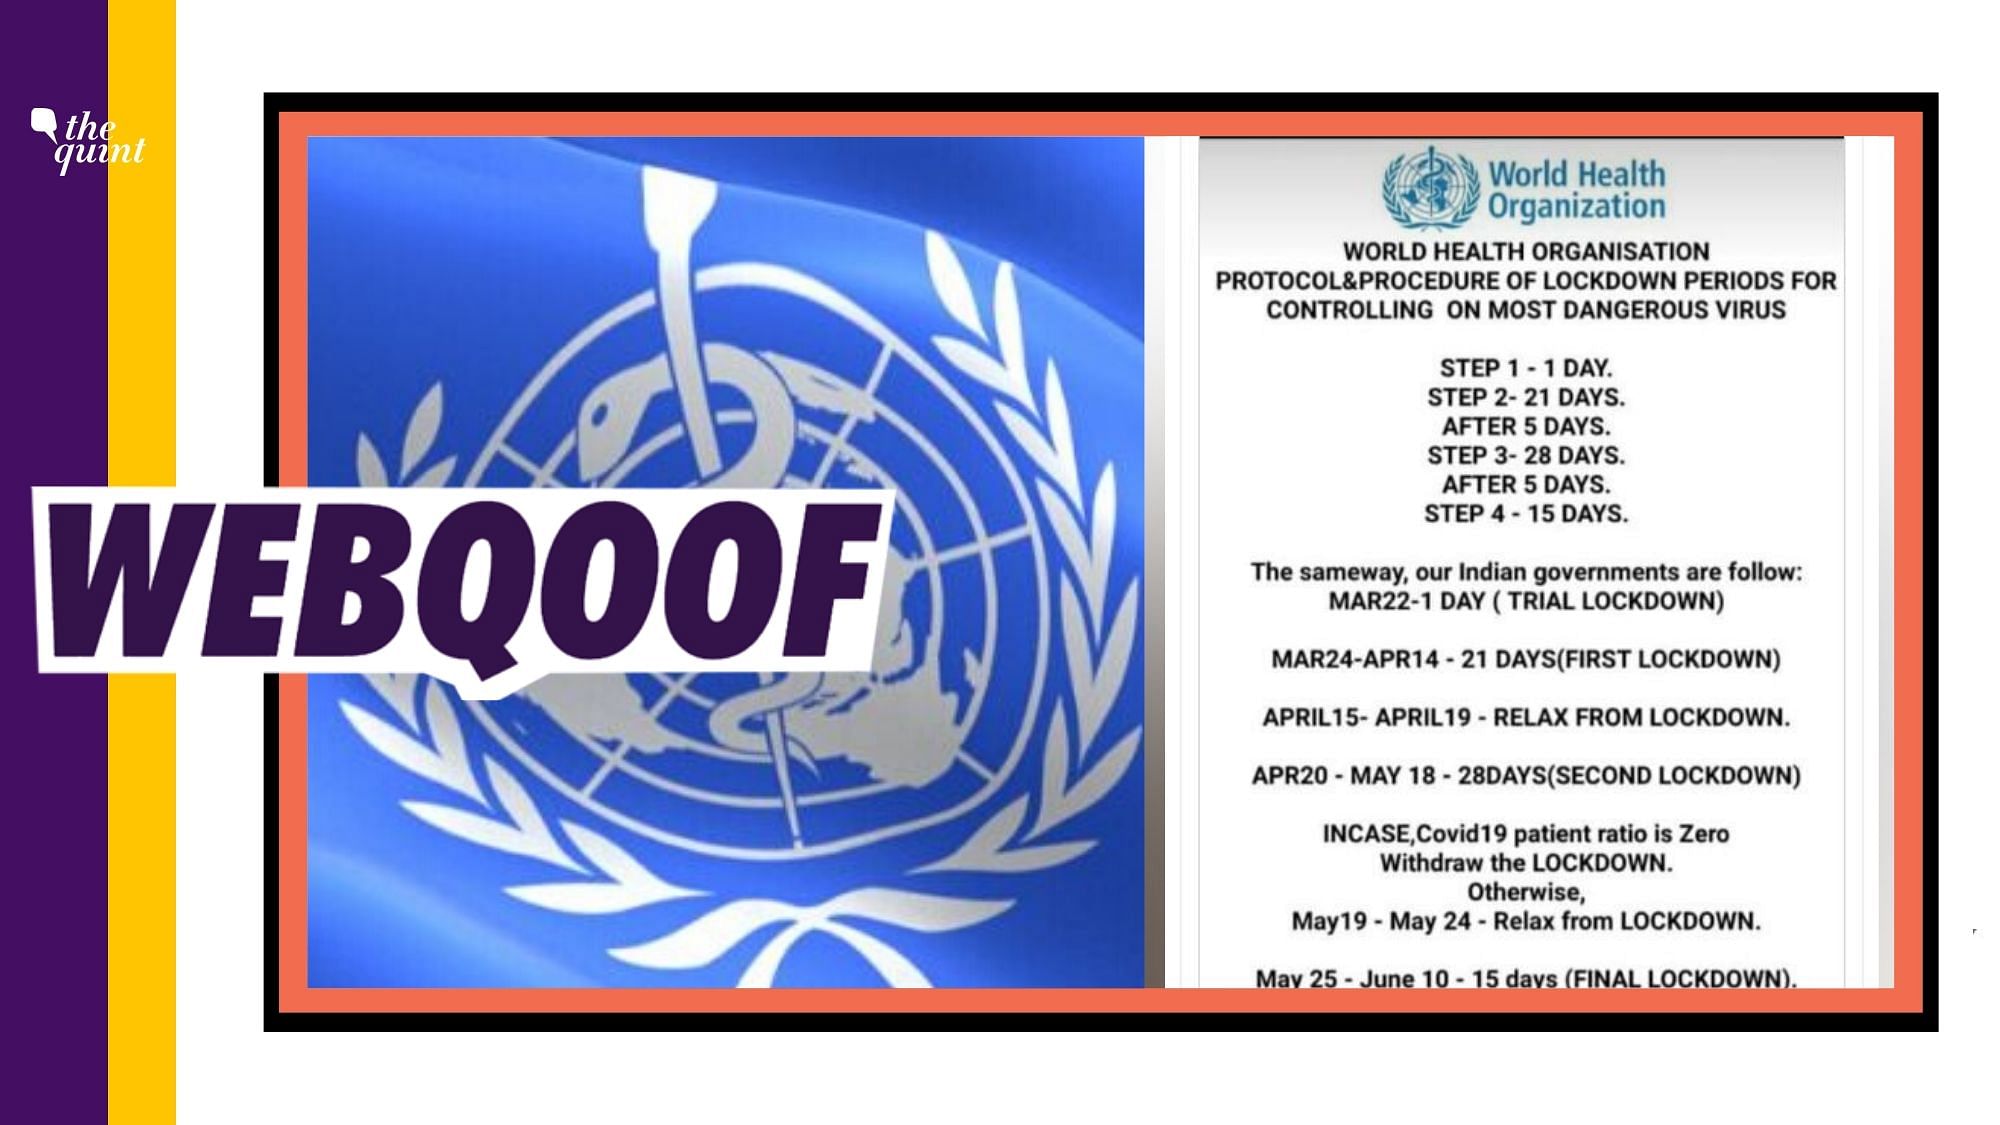 A message attributed to the WHO was shared to claim that the UN body has released an official protocol and procedure of lockdown periods to fight COVID-19.